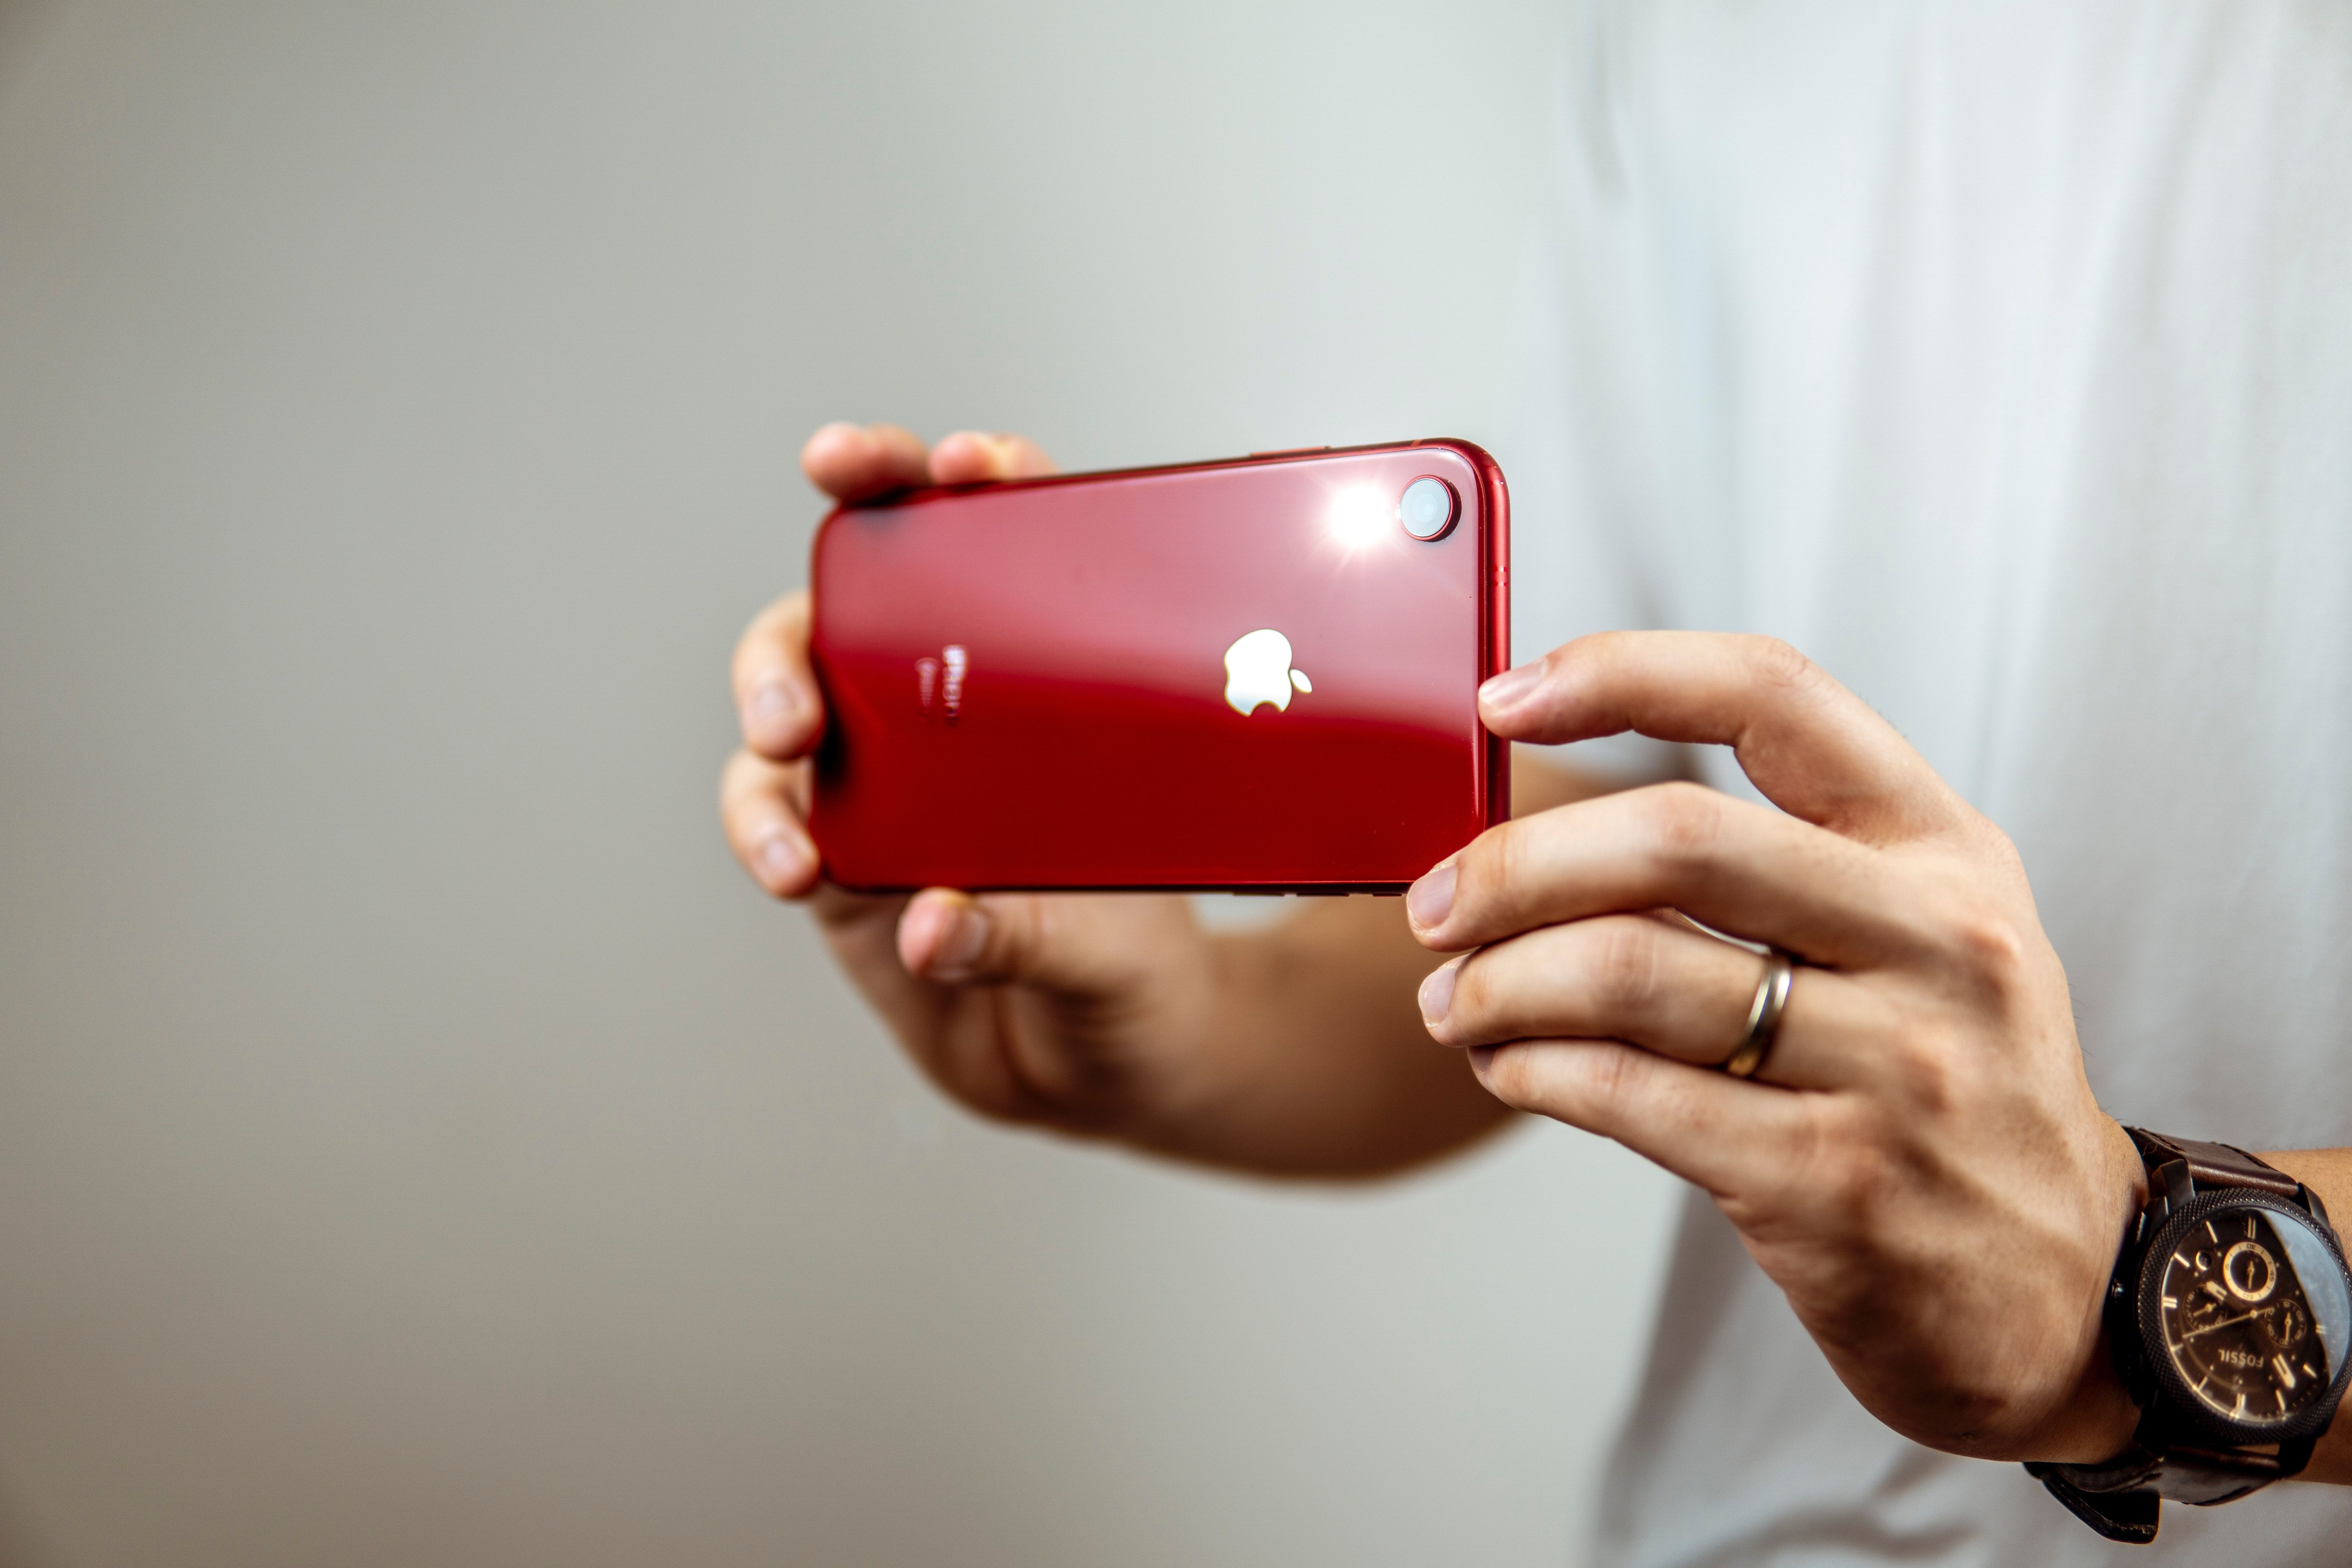 photo of someone taking a picture with a red iphone